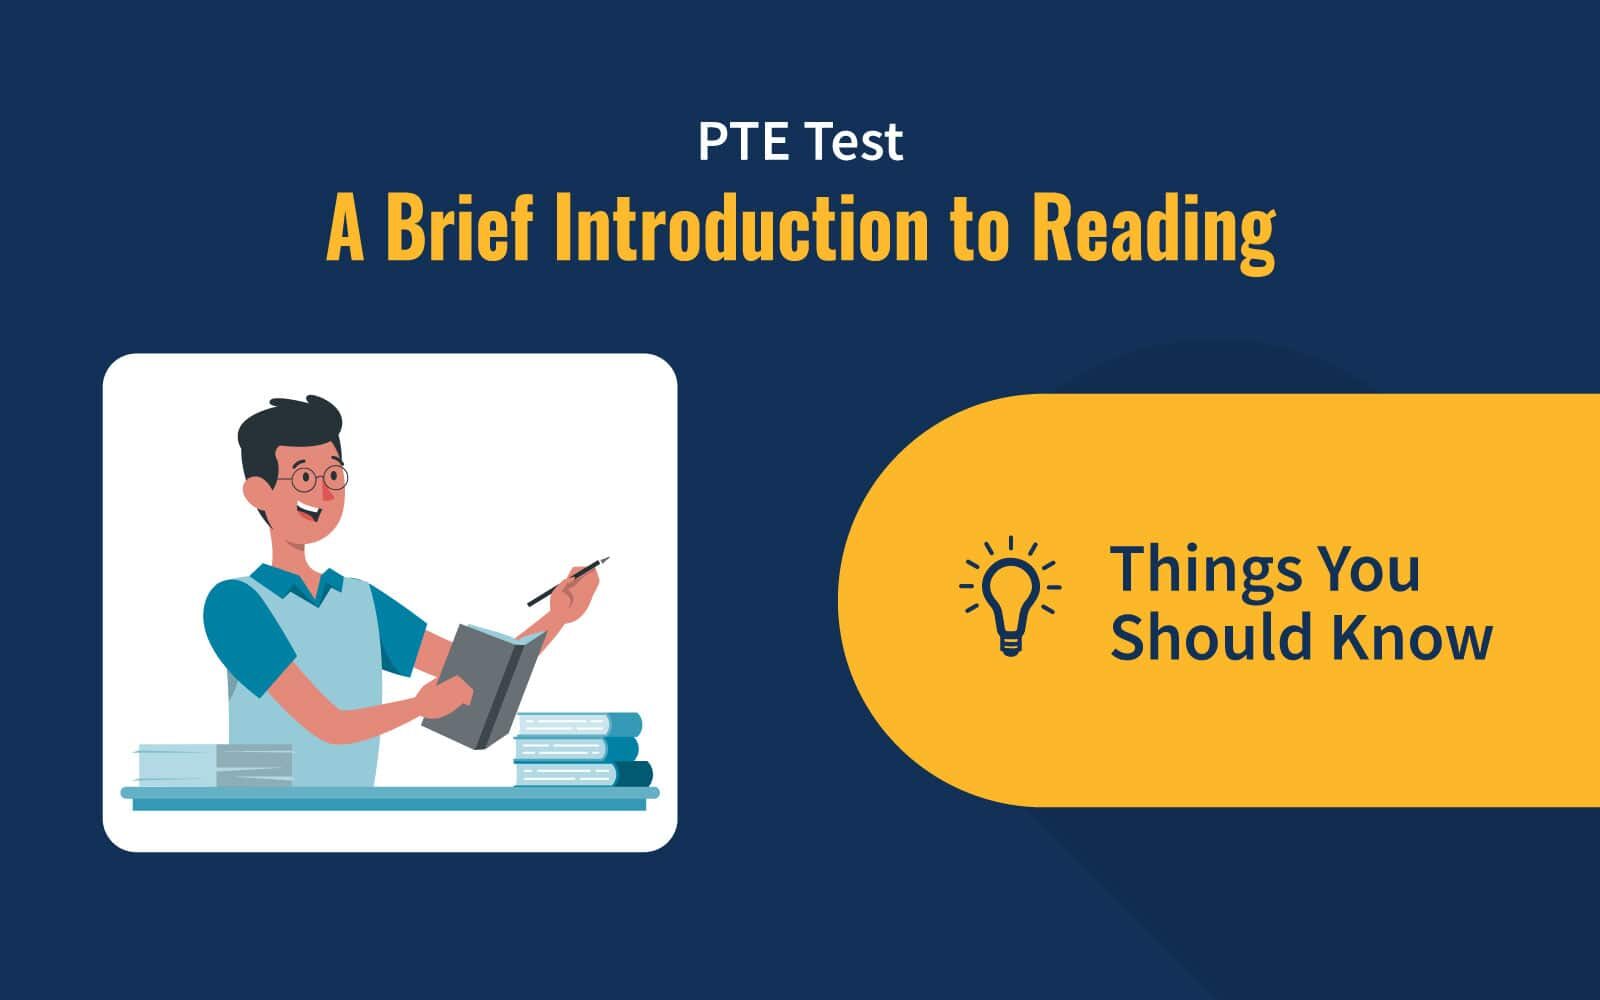 PTE Test: A Brief Introduction to Reading